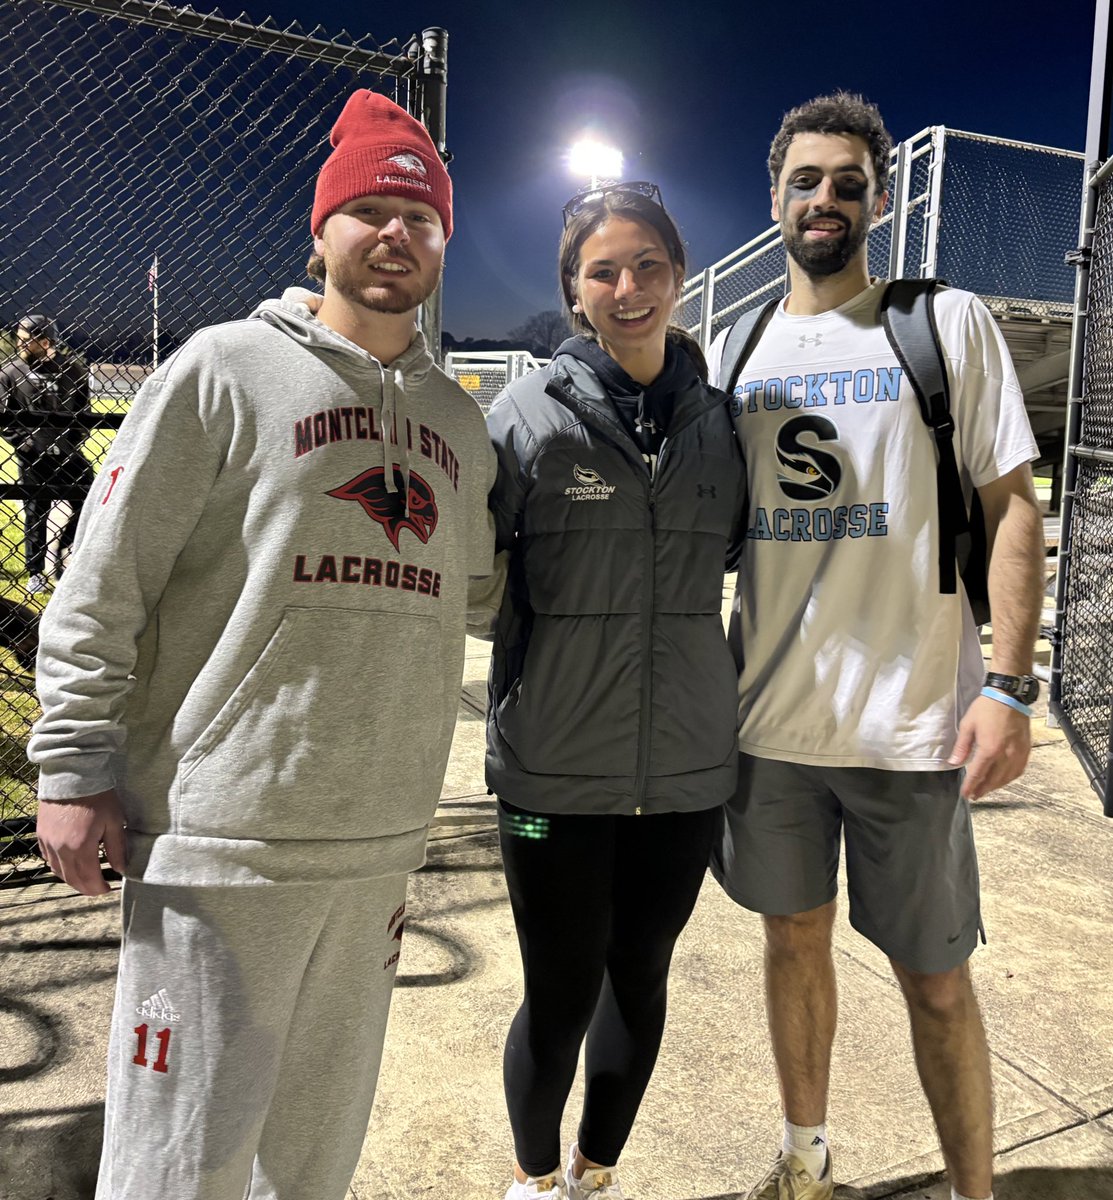 🐎Sebastian Graziano @Sgraziano_30 @MontclairStLax and Brendan McHale @M_cHale3 @StocktonMensLax matched up tonight!! Gina Marotta came out to support the Stangs!! Ride or Die ☠️🔥🥍- @MTHSStampede @MTHSAthBoosters @MontvilleTwpSch